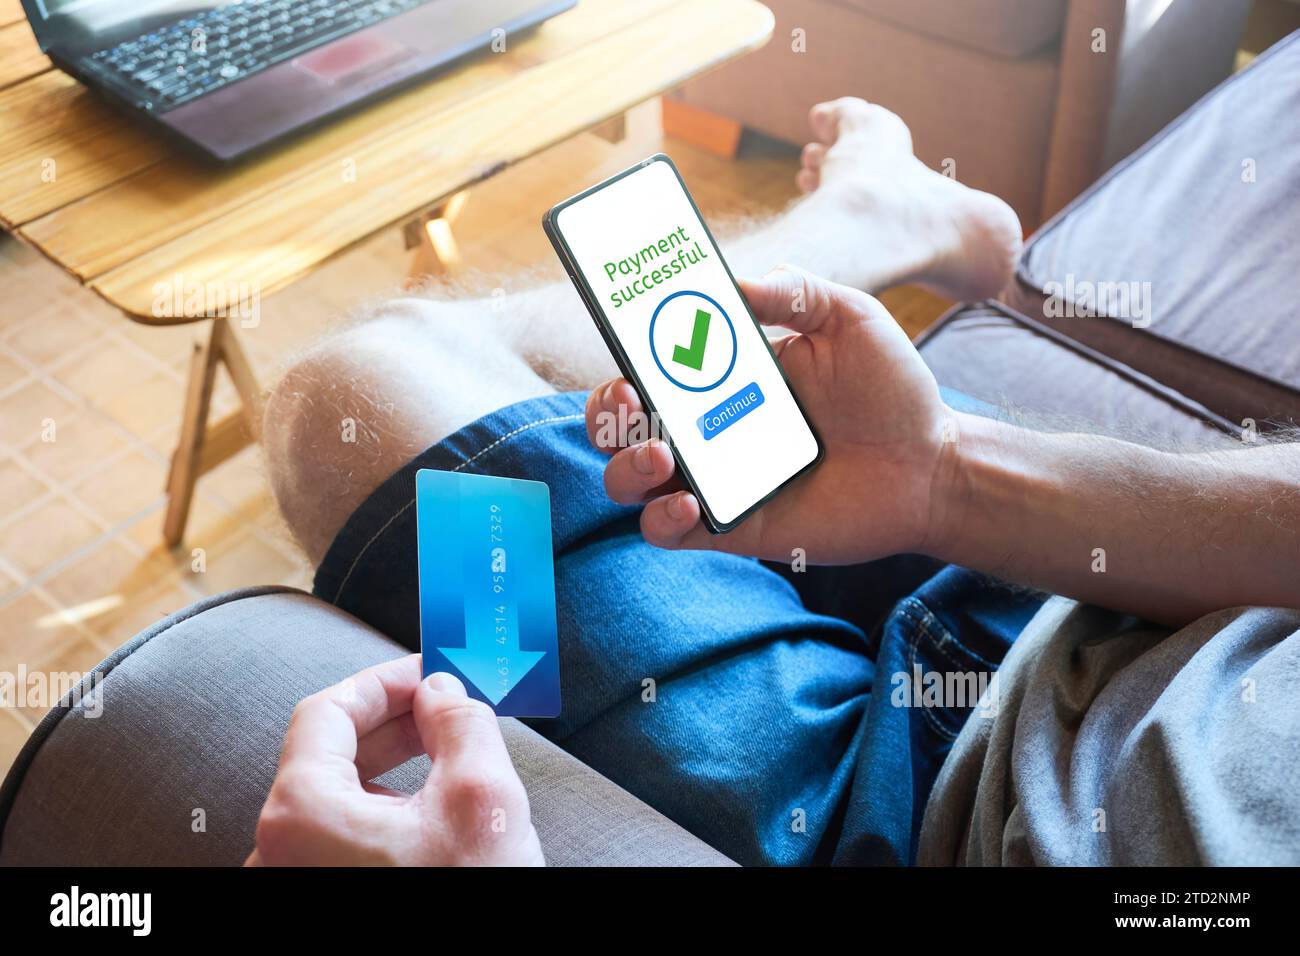 Man using mobile phone for payment while sitting on the couch at home, credit card in hand. Payment successful message on the screen, transaction comp Stock Photo